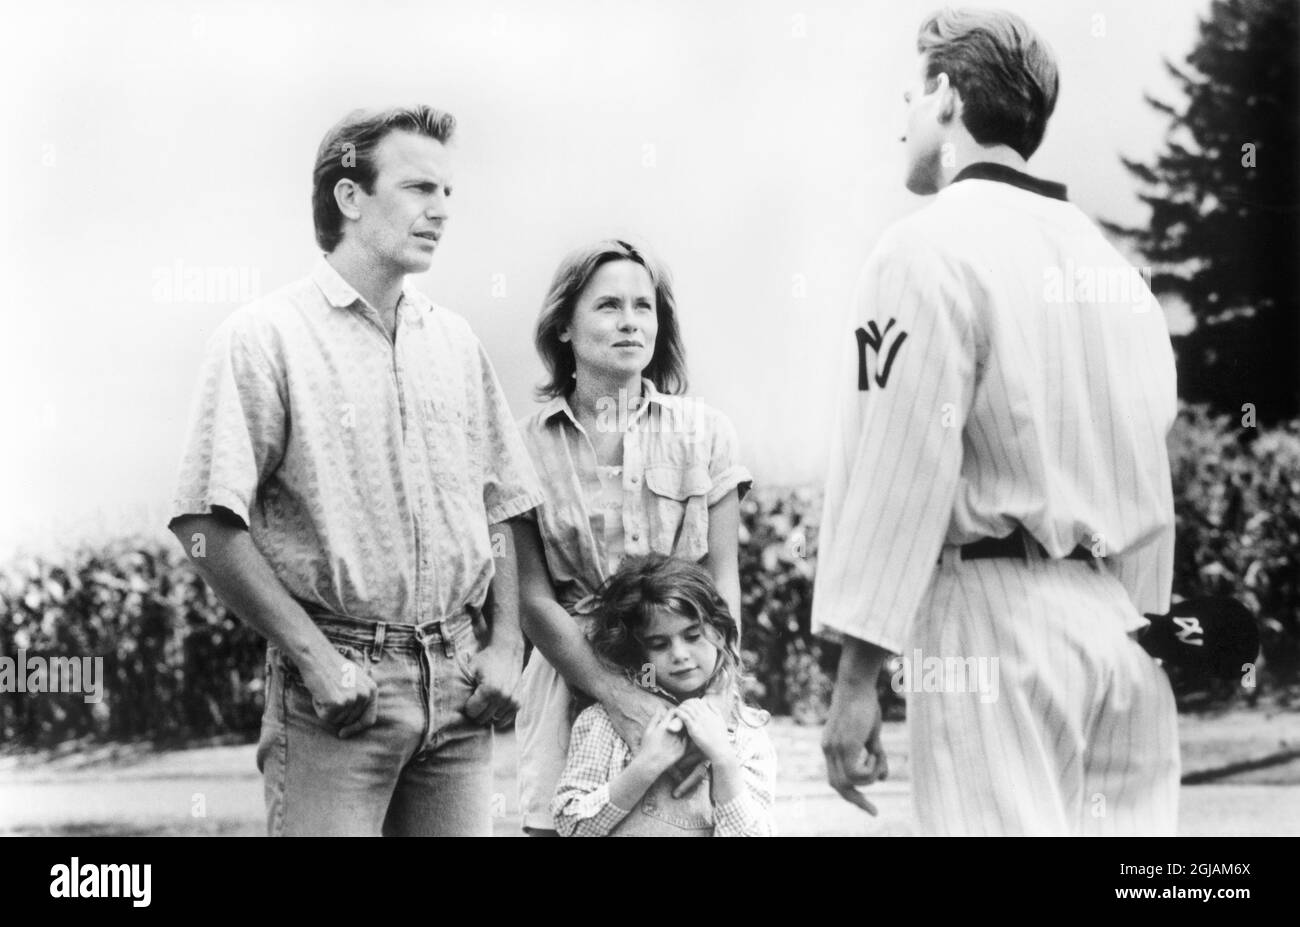 Kevin Costner, Amy Madigan, Gaby Hoffman, Dwier Brown, on-set of the Film, 'Field of Dreams', Universal Pictures, 1989 Foto Stock